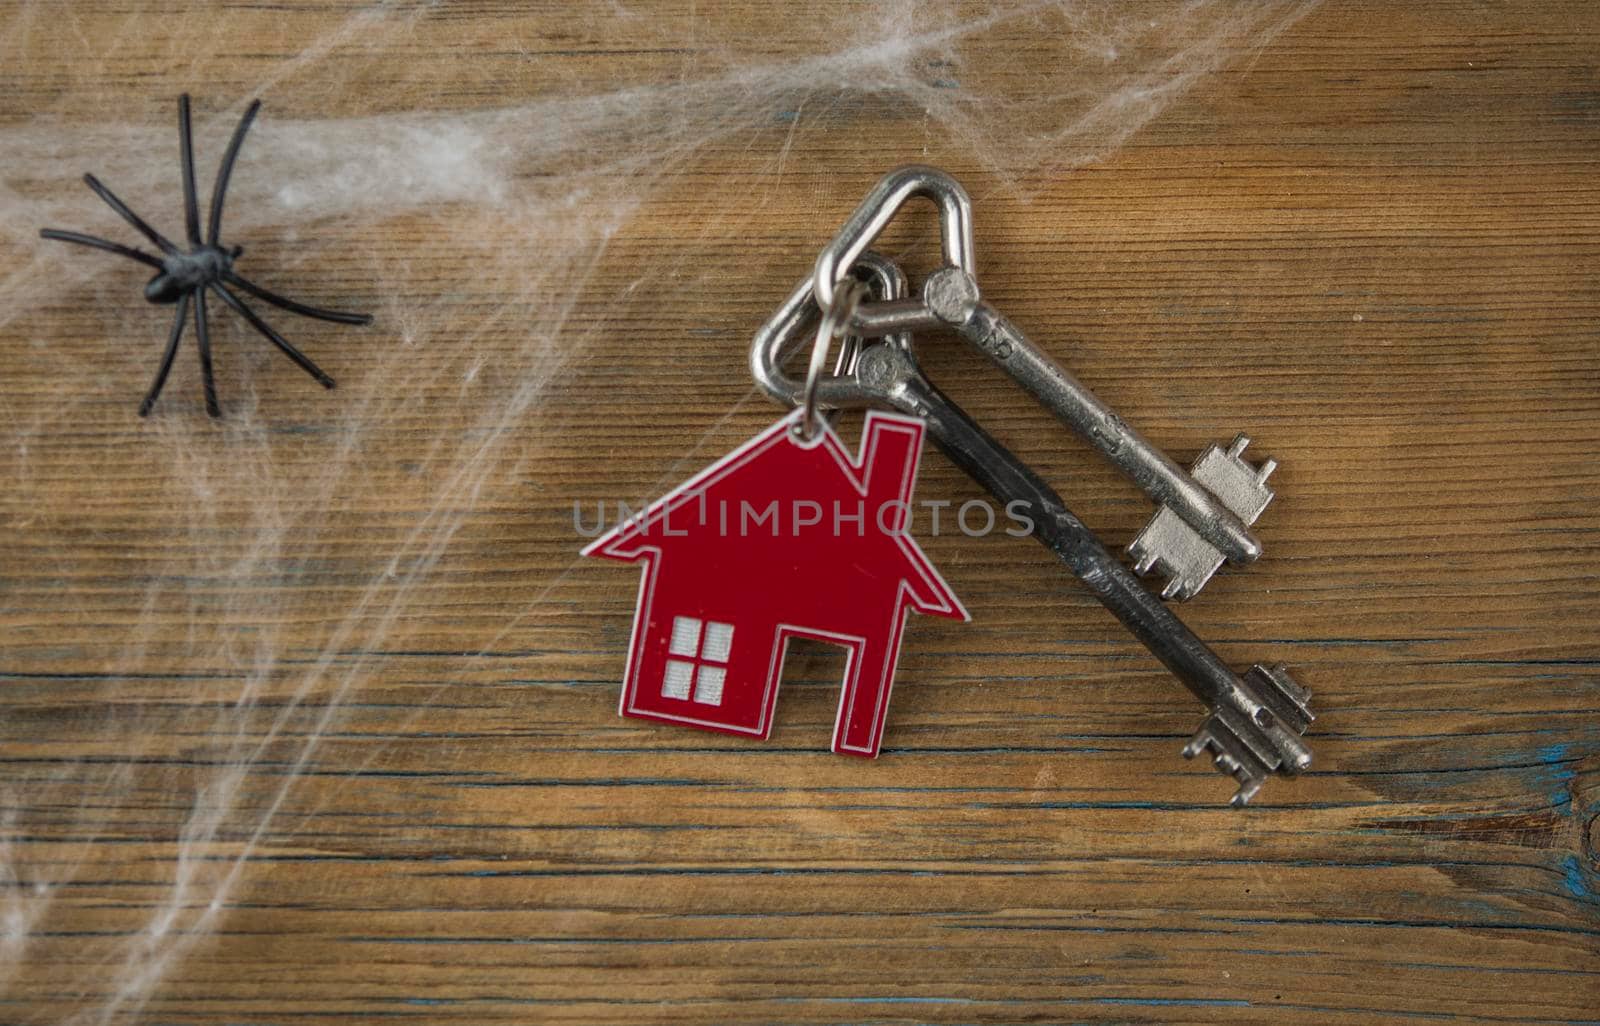 House symbol with silver keys, spider web and black spiders on a wood table. Top view